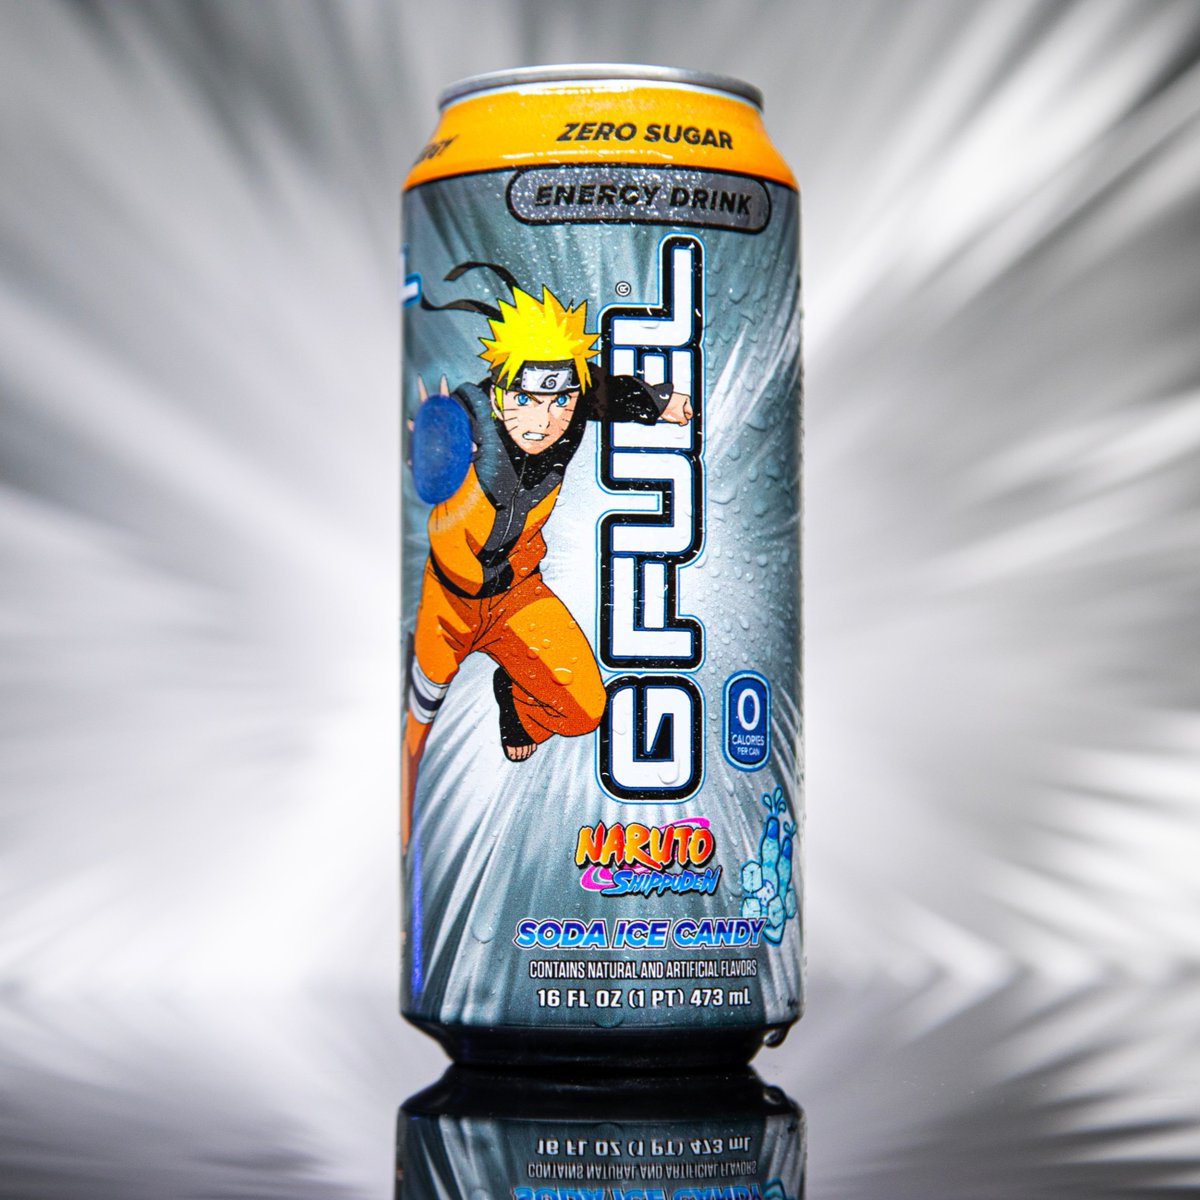 🧡 𝗥𝗧 + 𝗙𝗢𝗟𝗟𝗢𝗪 to win a #NARUTO x #GFUEL 'SODA ICE CANDY' 12 PACK! 🤩 2 winners picked next week bc our Cans are ON SALE EXCLUSIVELY via our TikTok Shop! 🛍️ 𝗦𝗛𝗢𝗣 𝗧𝗶𝗸𝗧𝗼𝗸: Tiktok.com/@gfuelenergy?_…